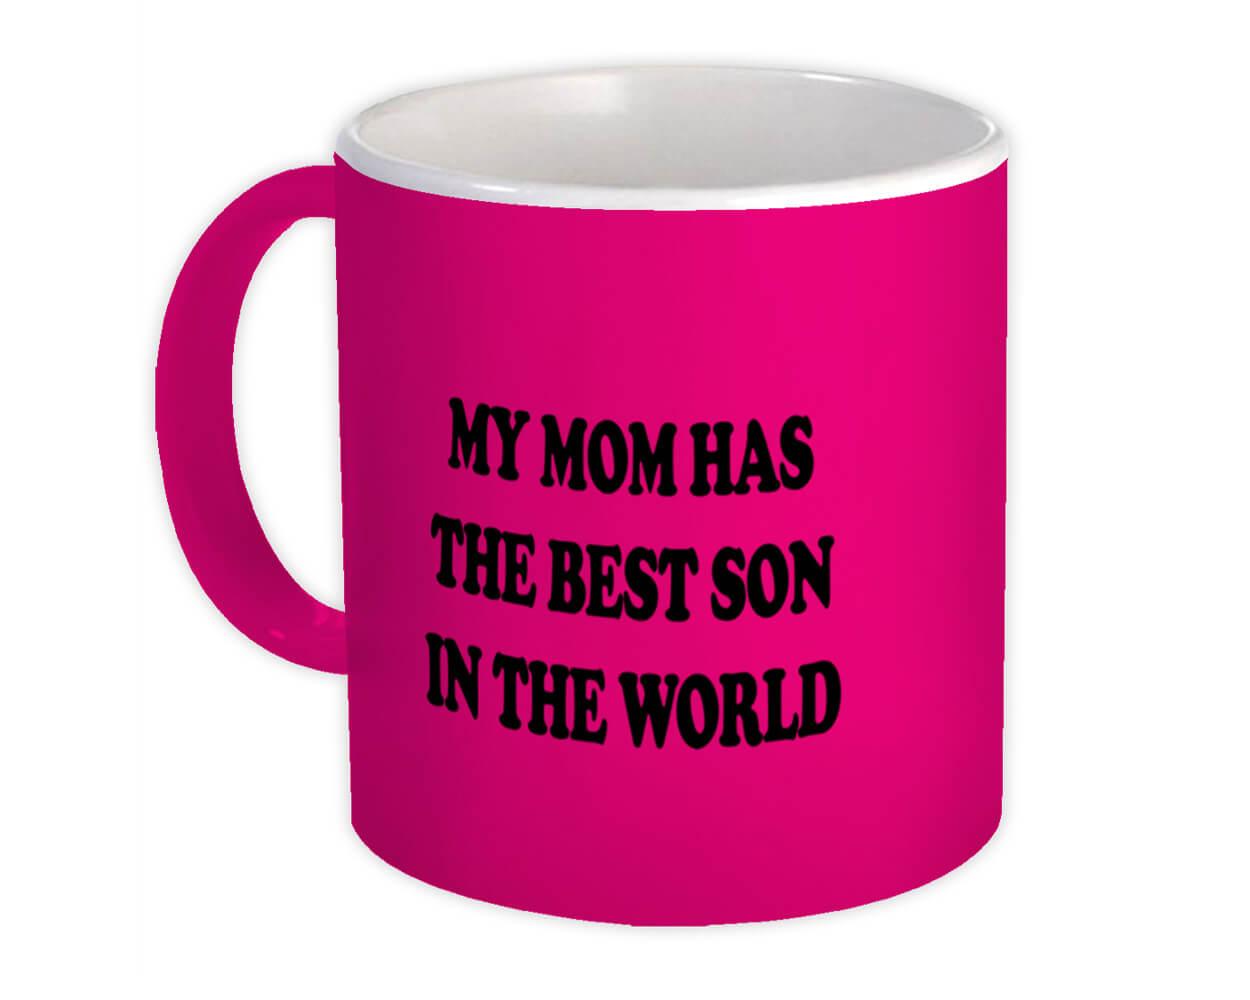 Mugs - Mother - My Mom Has The Best Son In The World